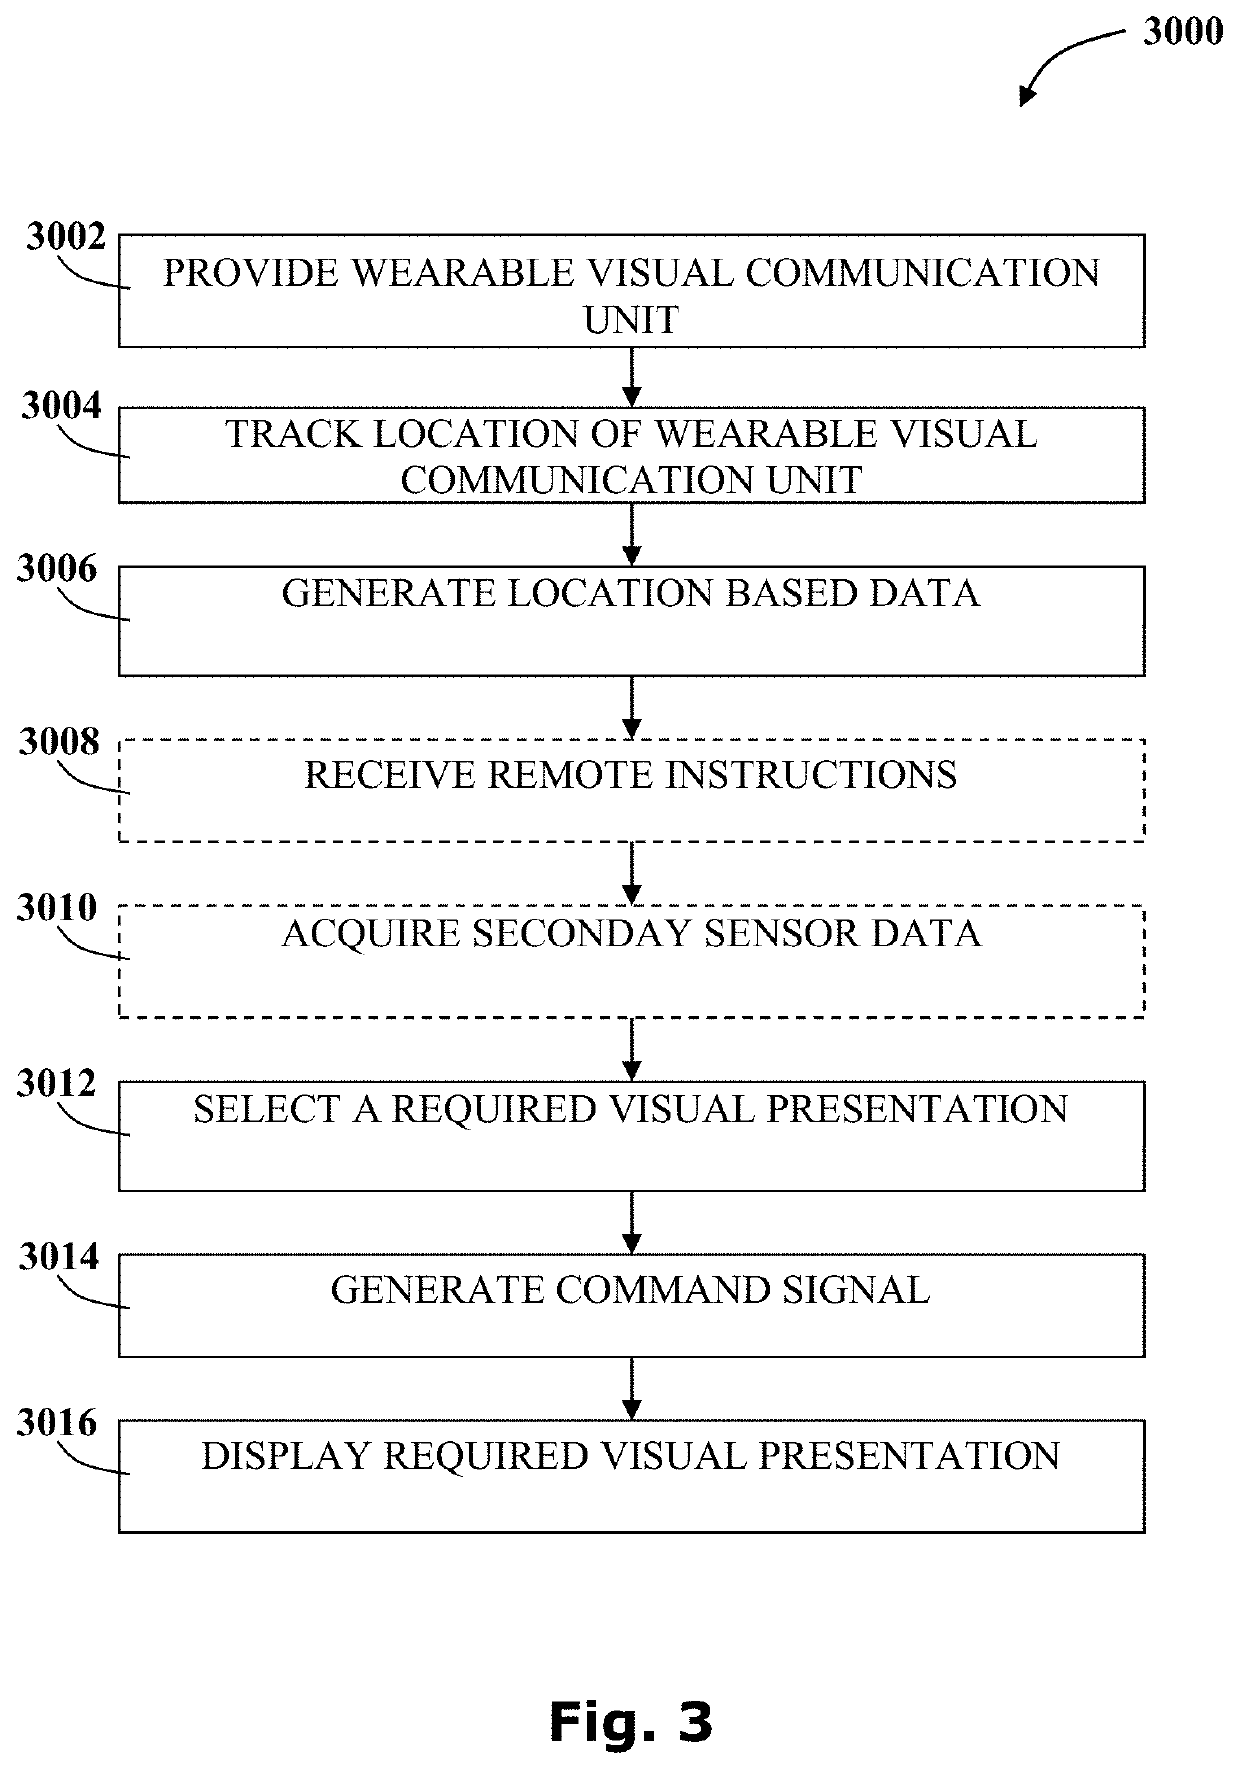 System and method for providing mobile personal visual communications display